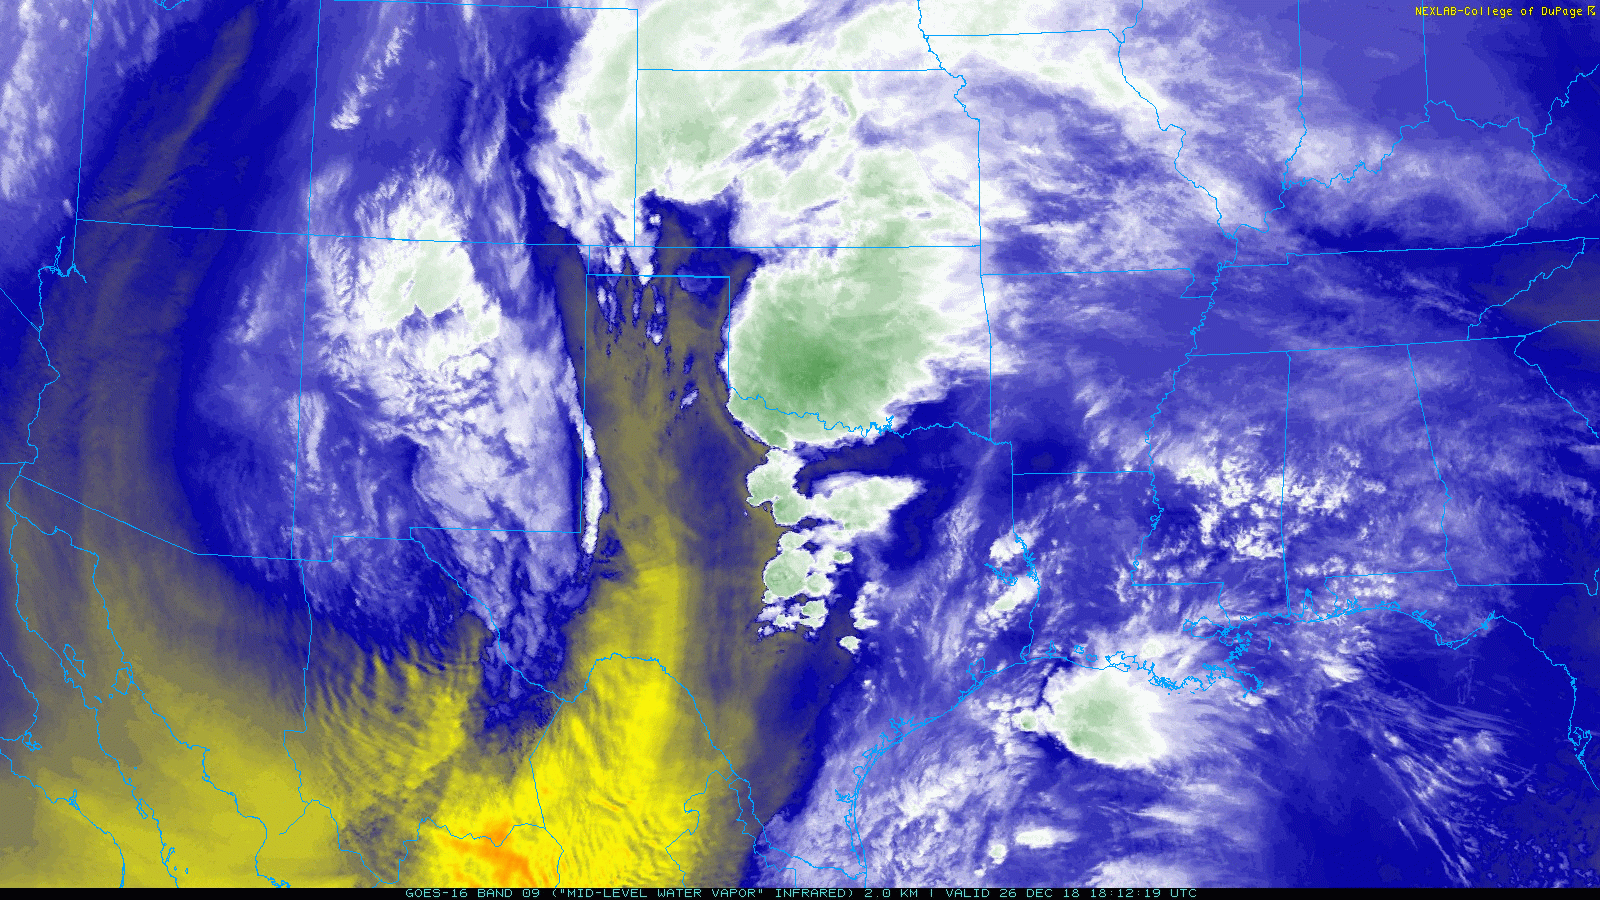 Water vapor satellite loop captured from 12:12 pm to 12:57 pm on 26 December 2018.